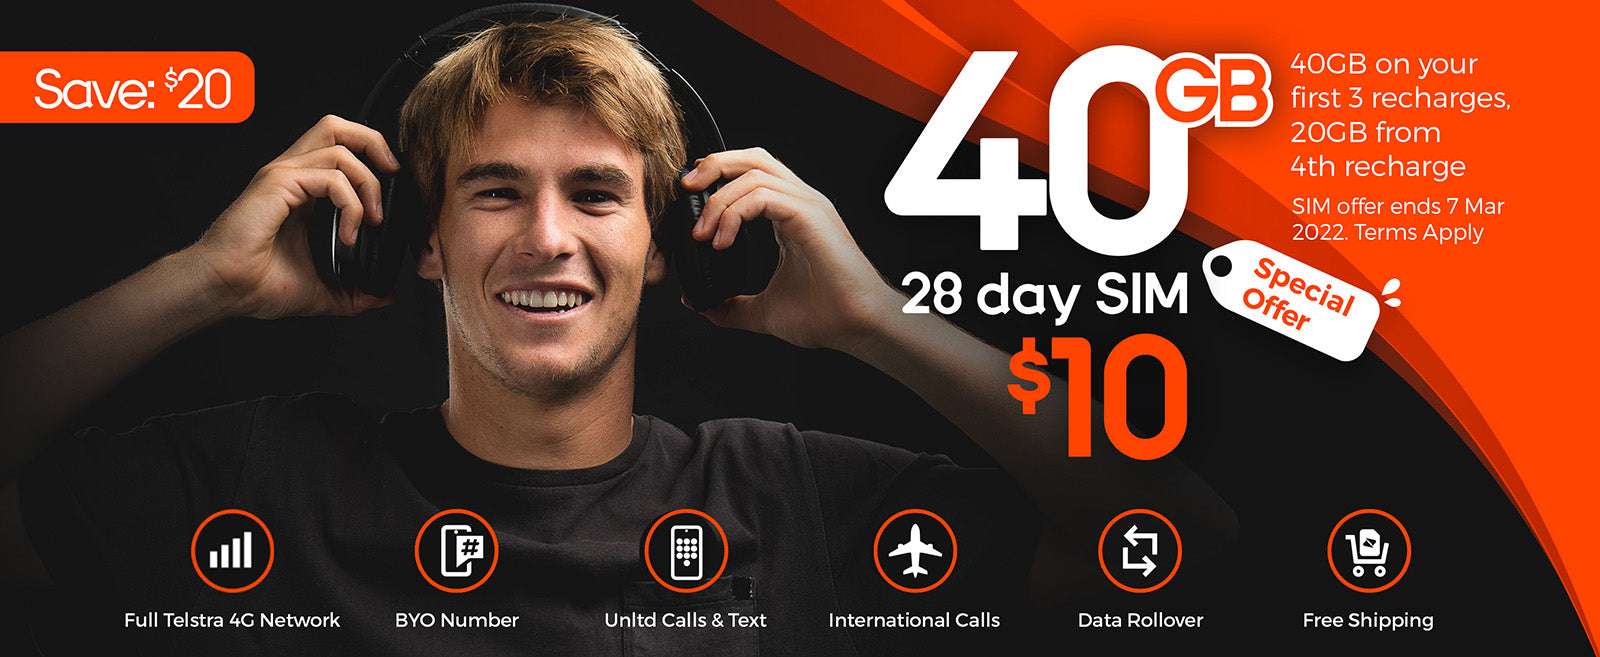 Boost Mobile Save $20 OFF on $30 Prepaid SIM now $10